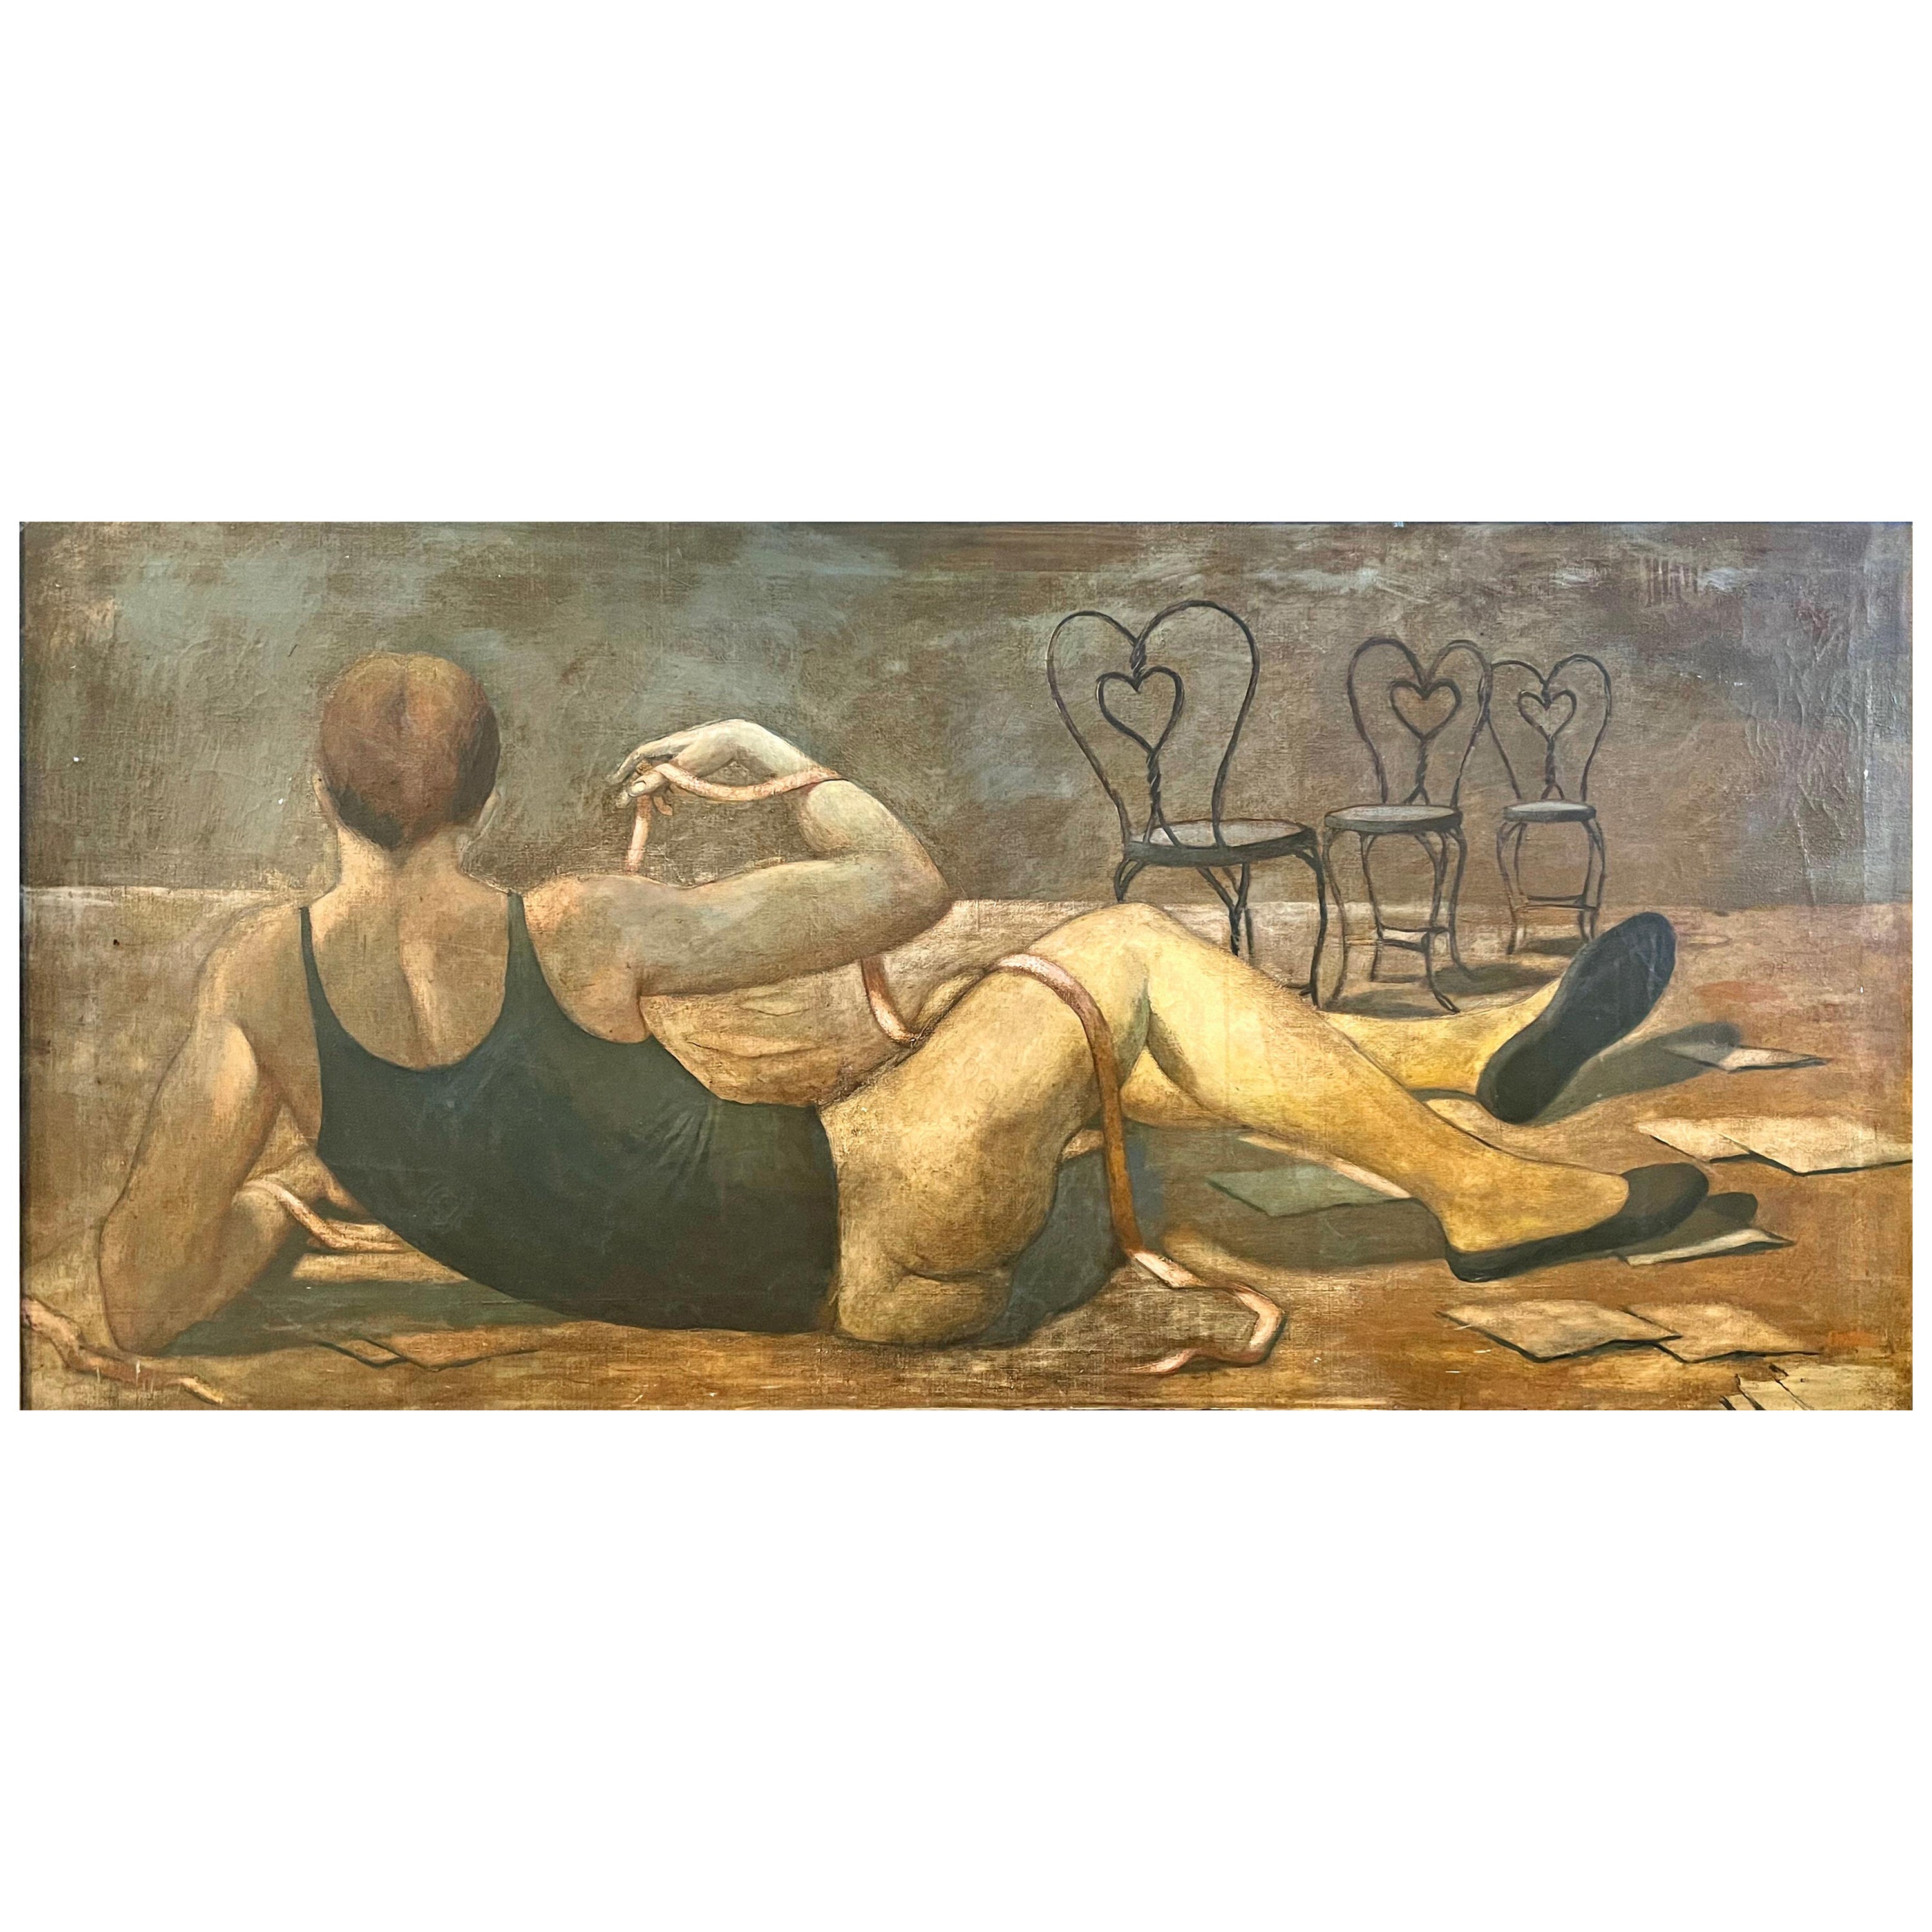 "Dancer at Rest," Large Painting of Half-Nude Male Ballet Dancer, Mid Century